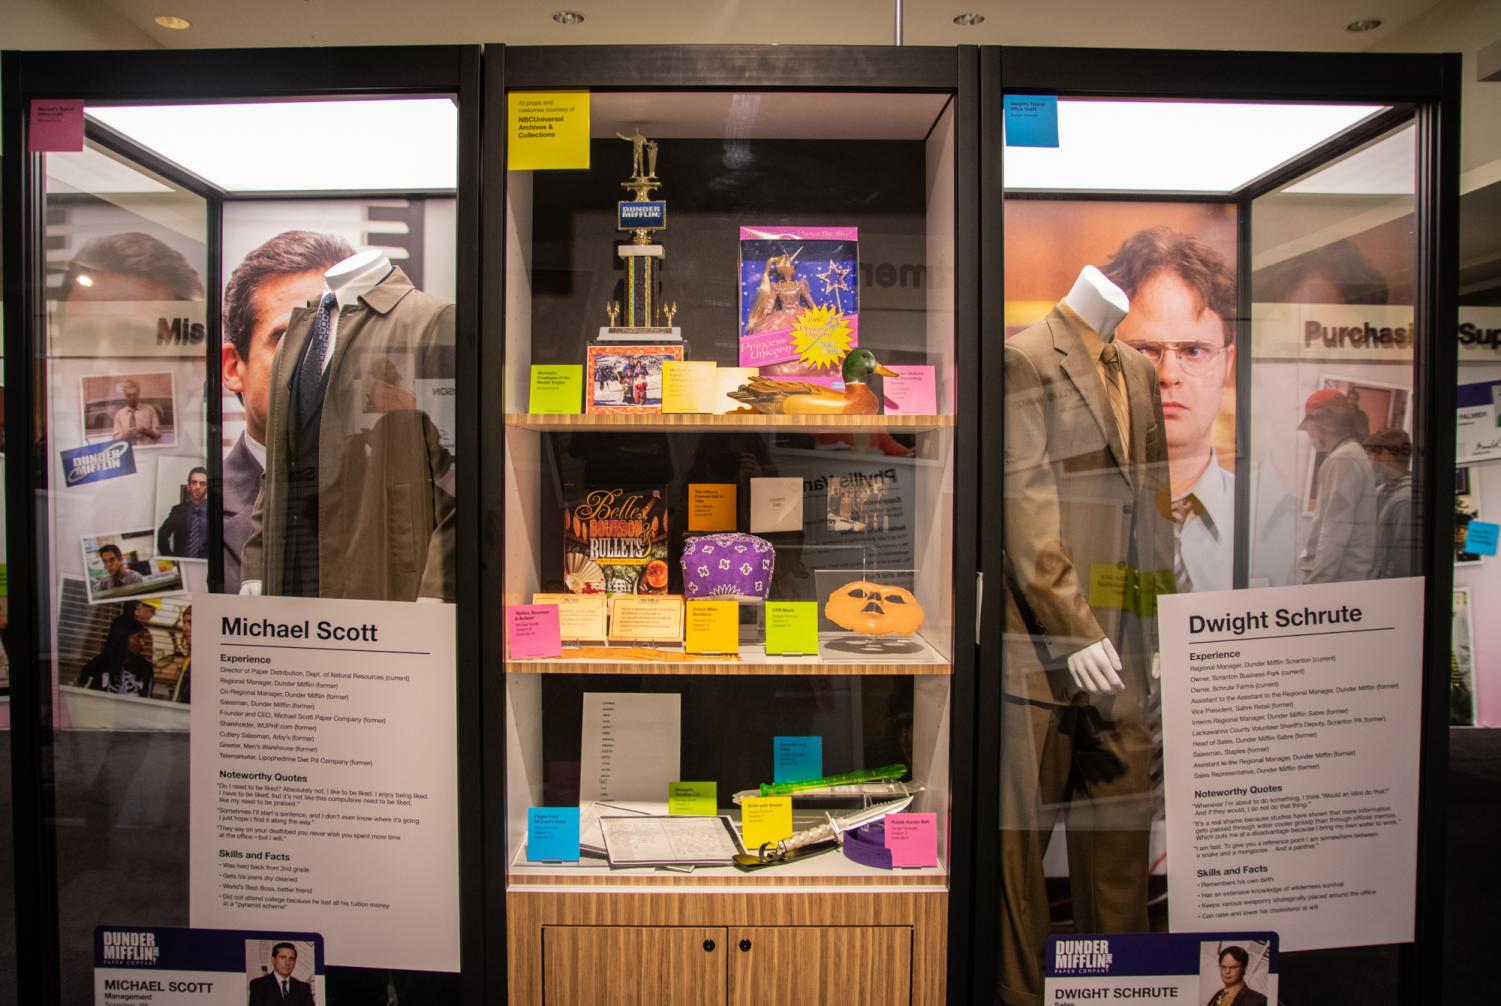 Take a look inside of “The Office Experience” pop-up in Chicago